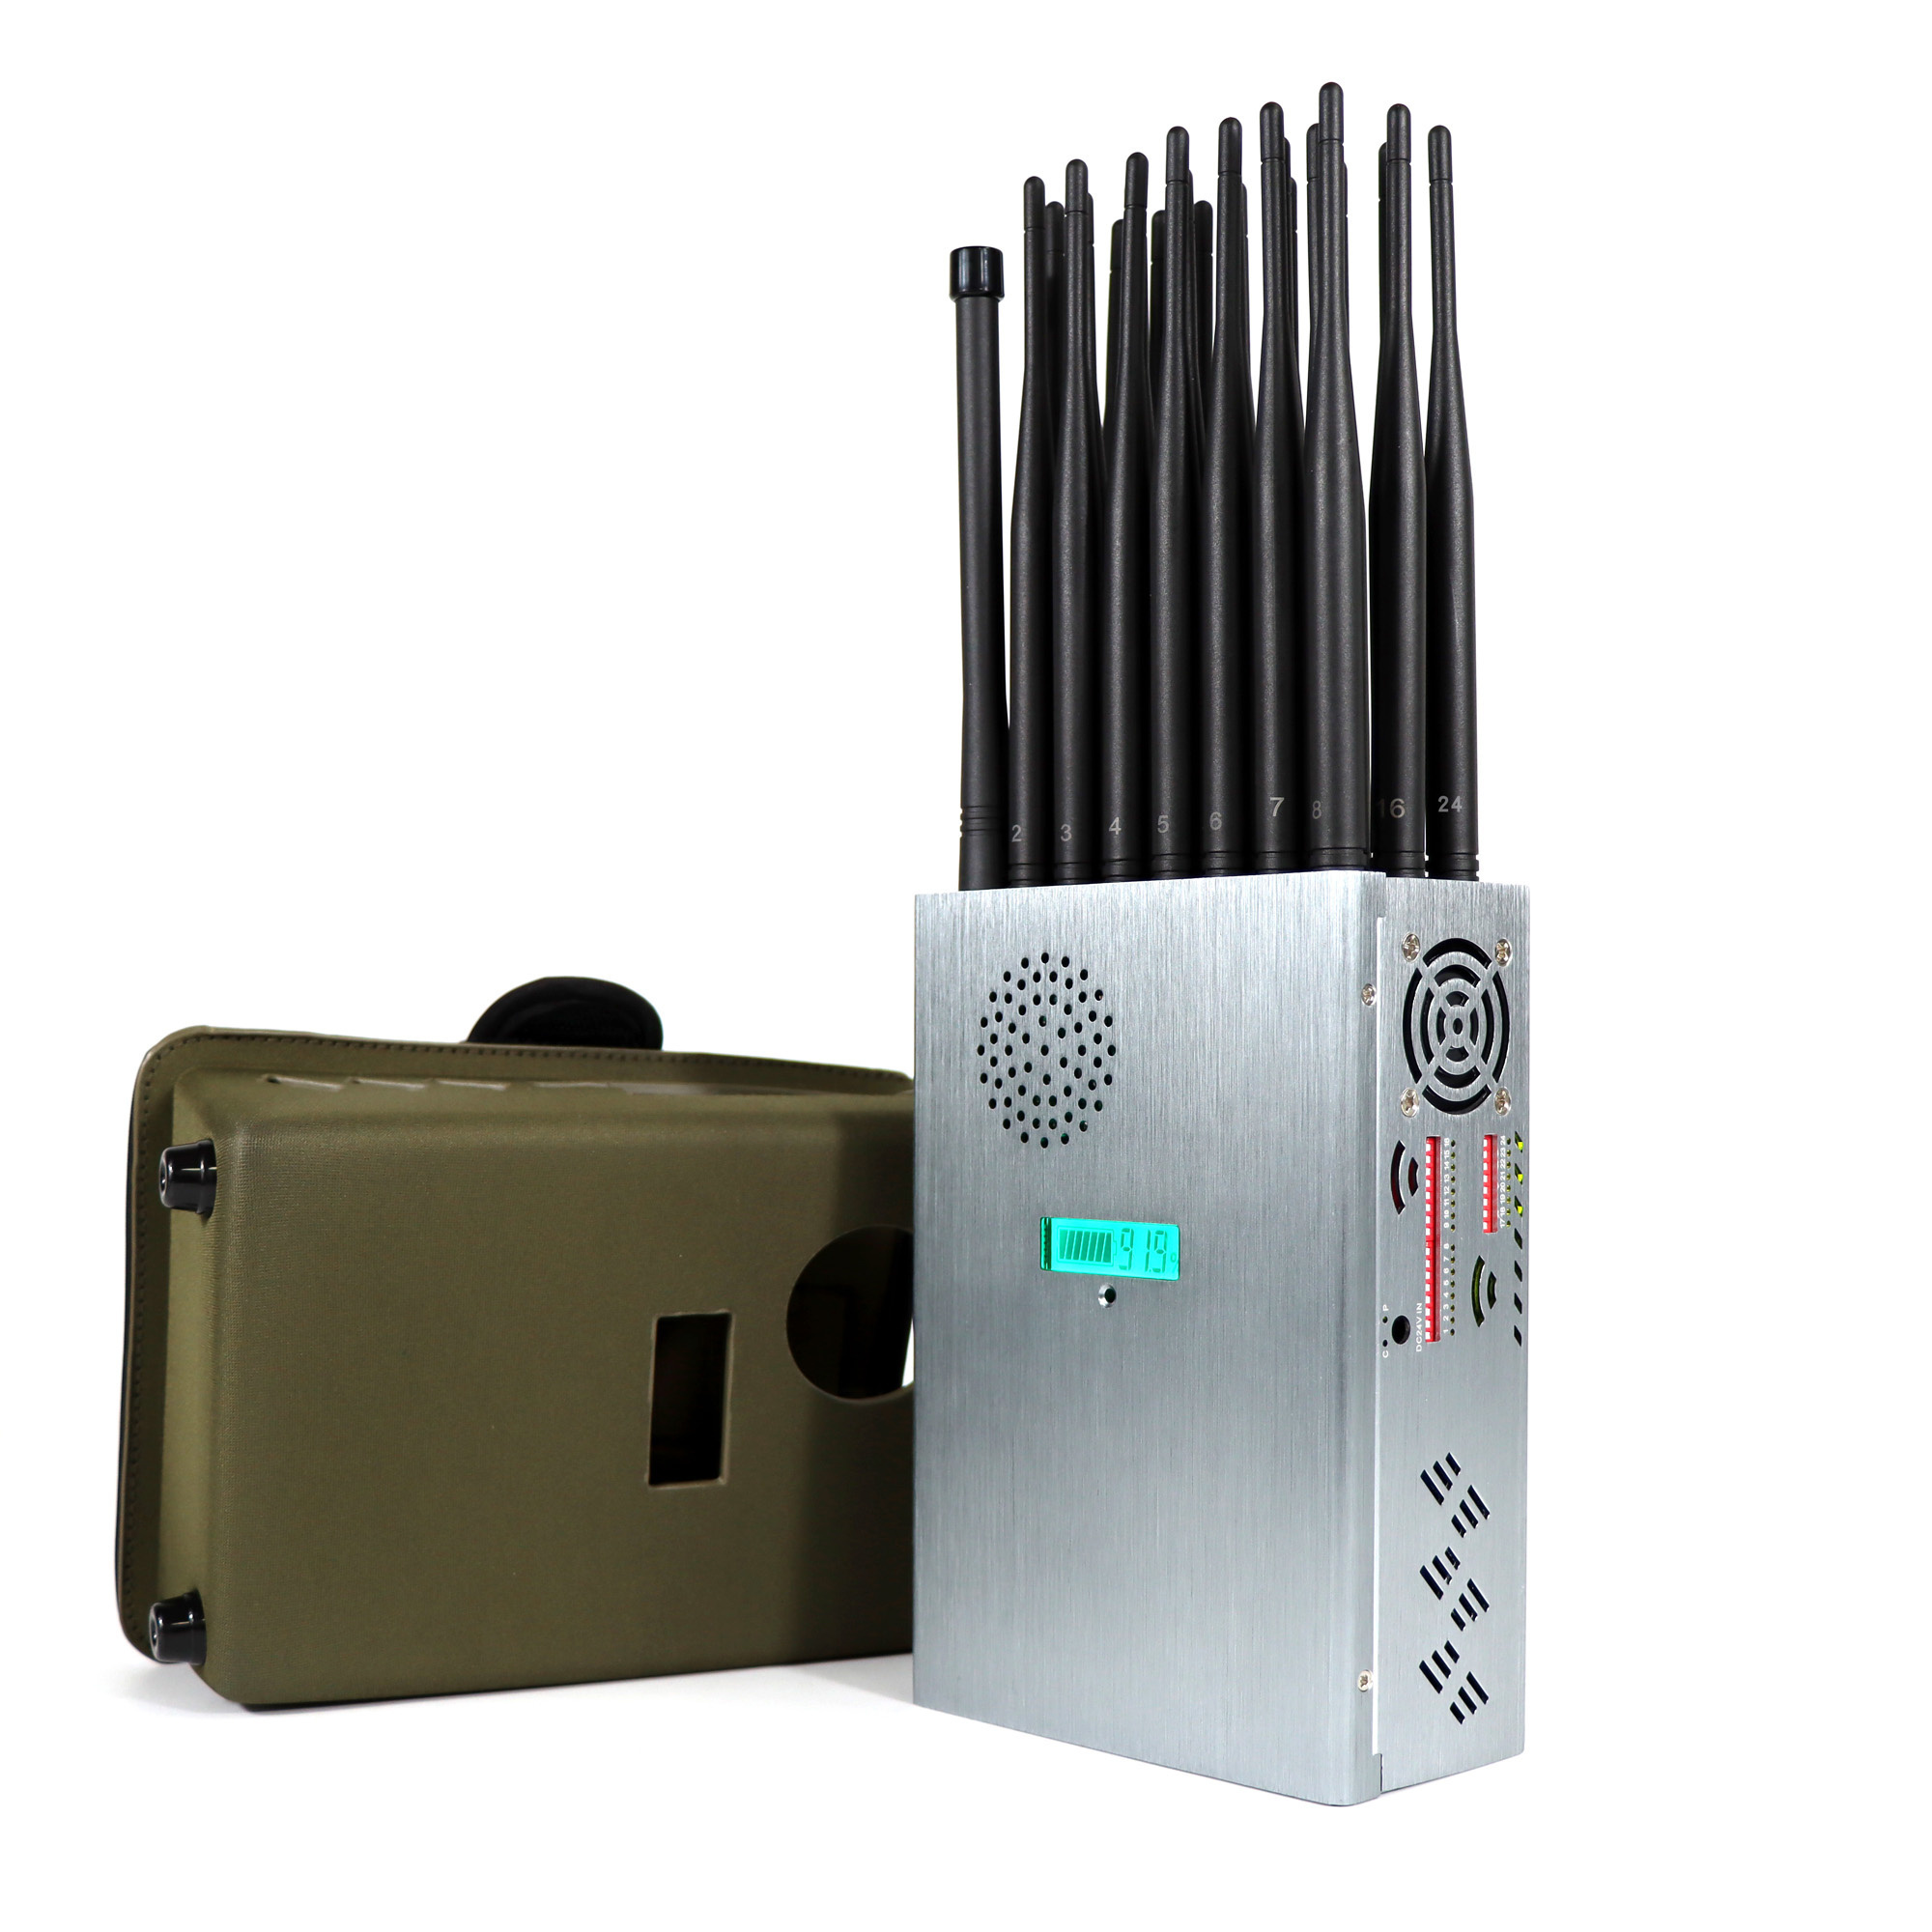 24 Antennes GPS signal jammer